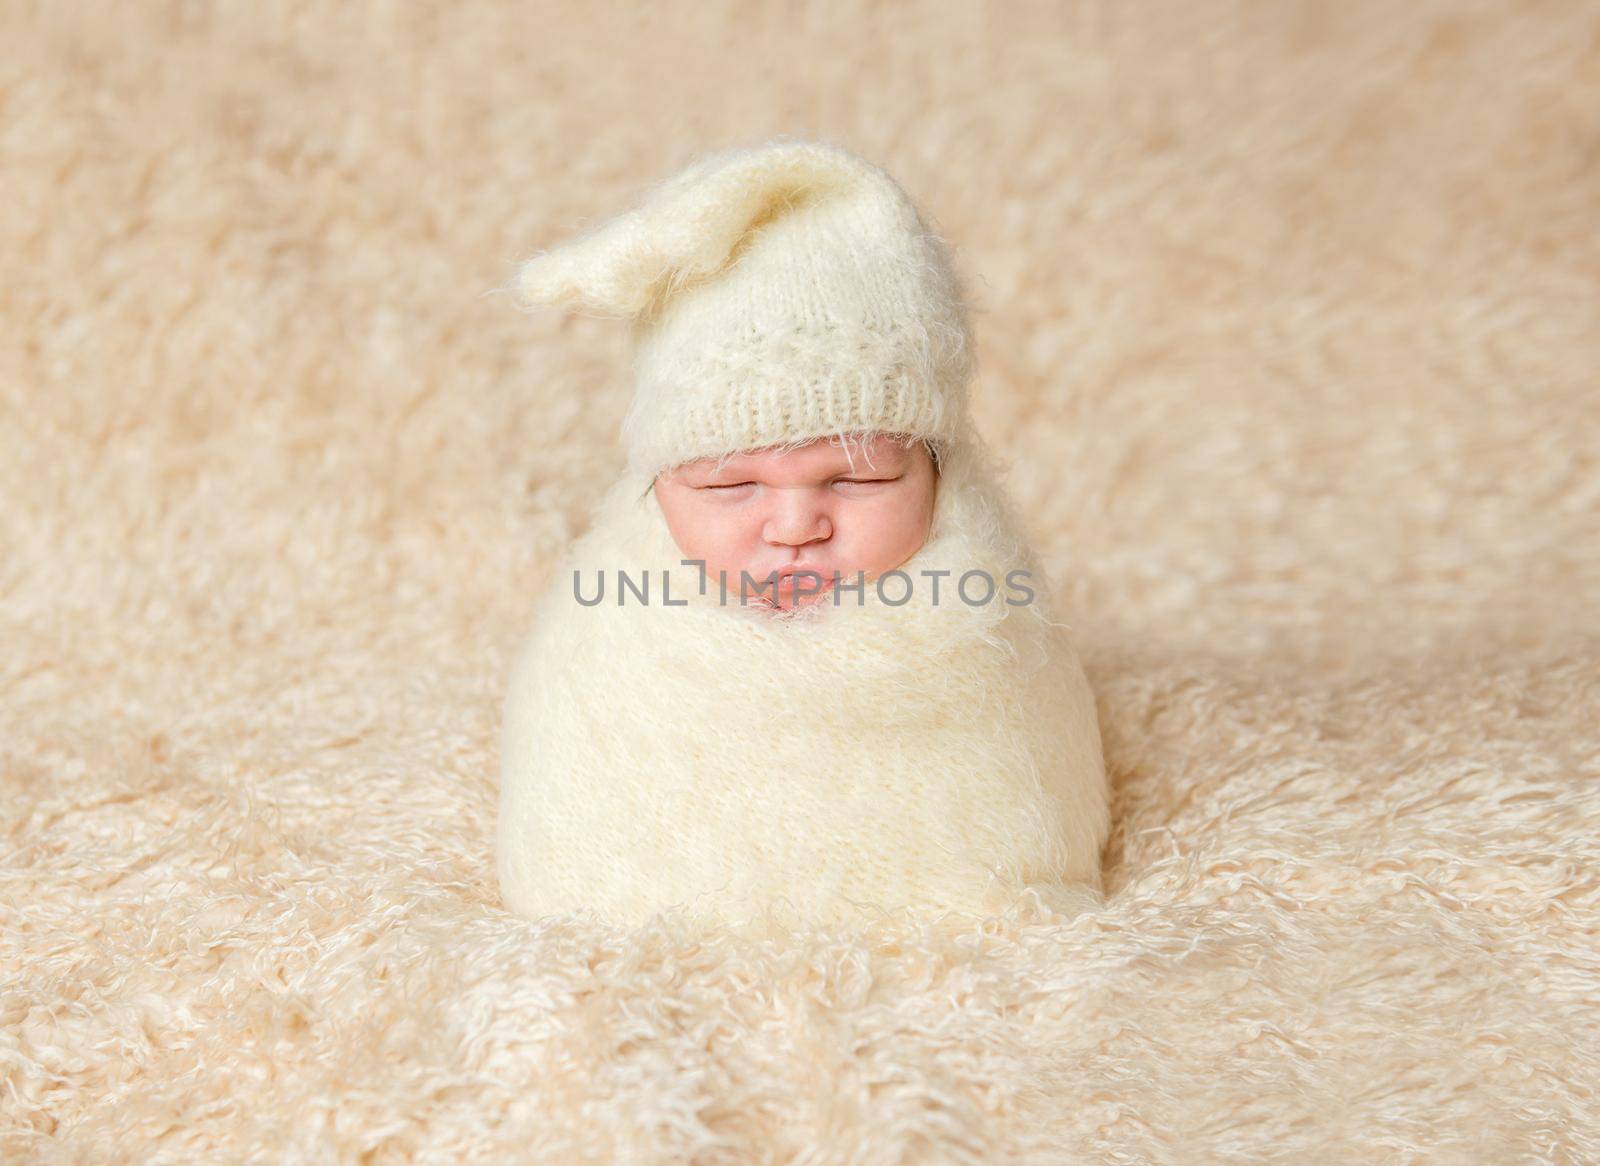 Infant in a funny pose, wrapped in blanket by tan4ikk1